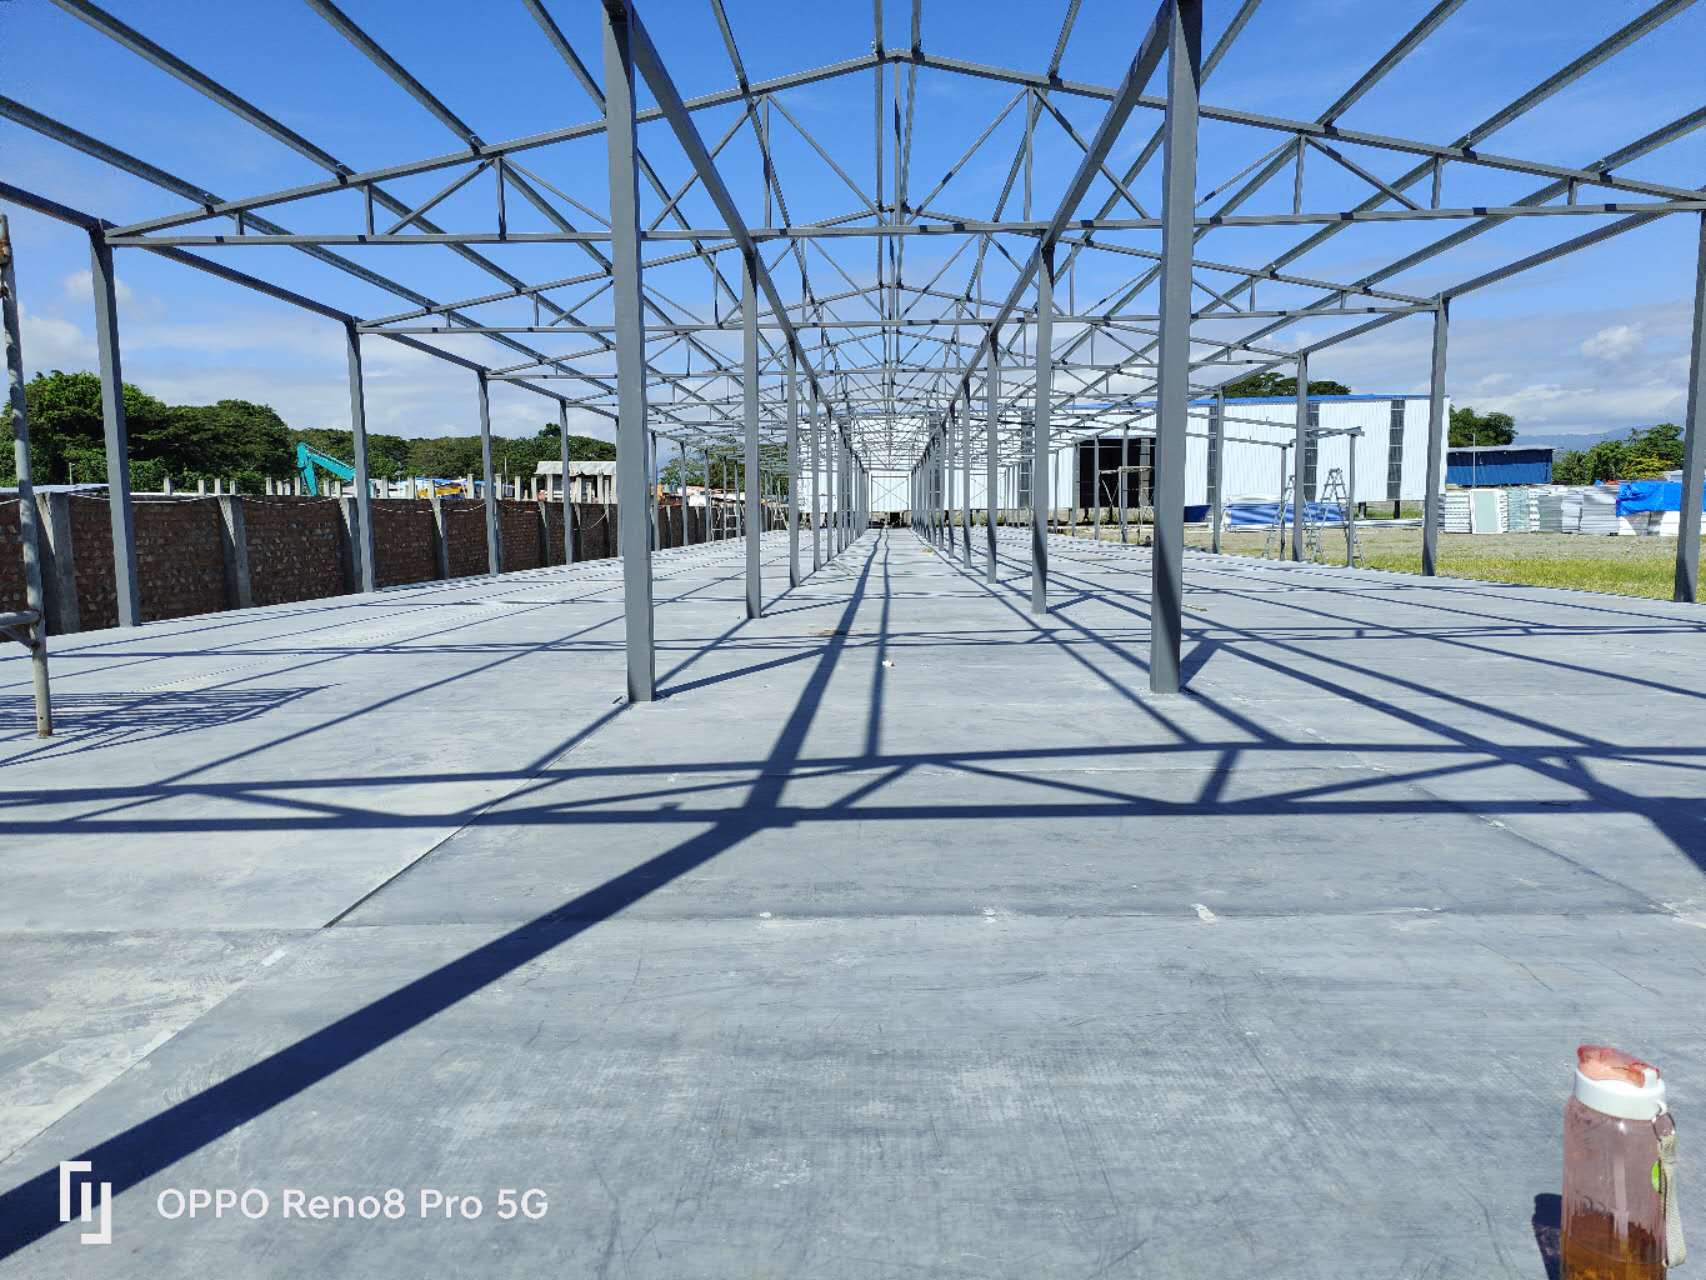 What Materials Are Needed to Build a Steel Structure Workshop?